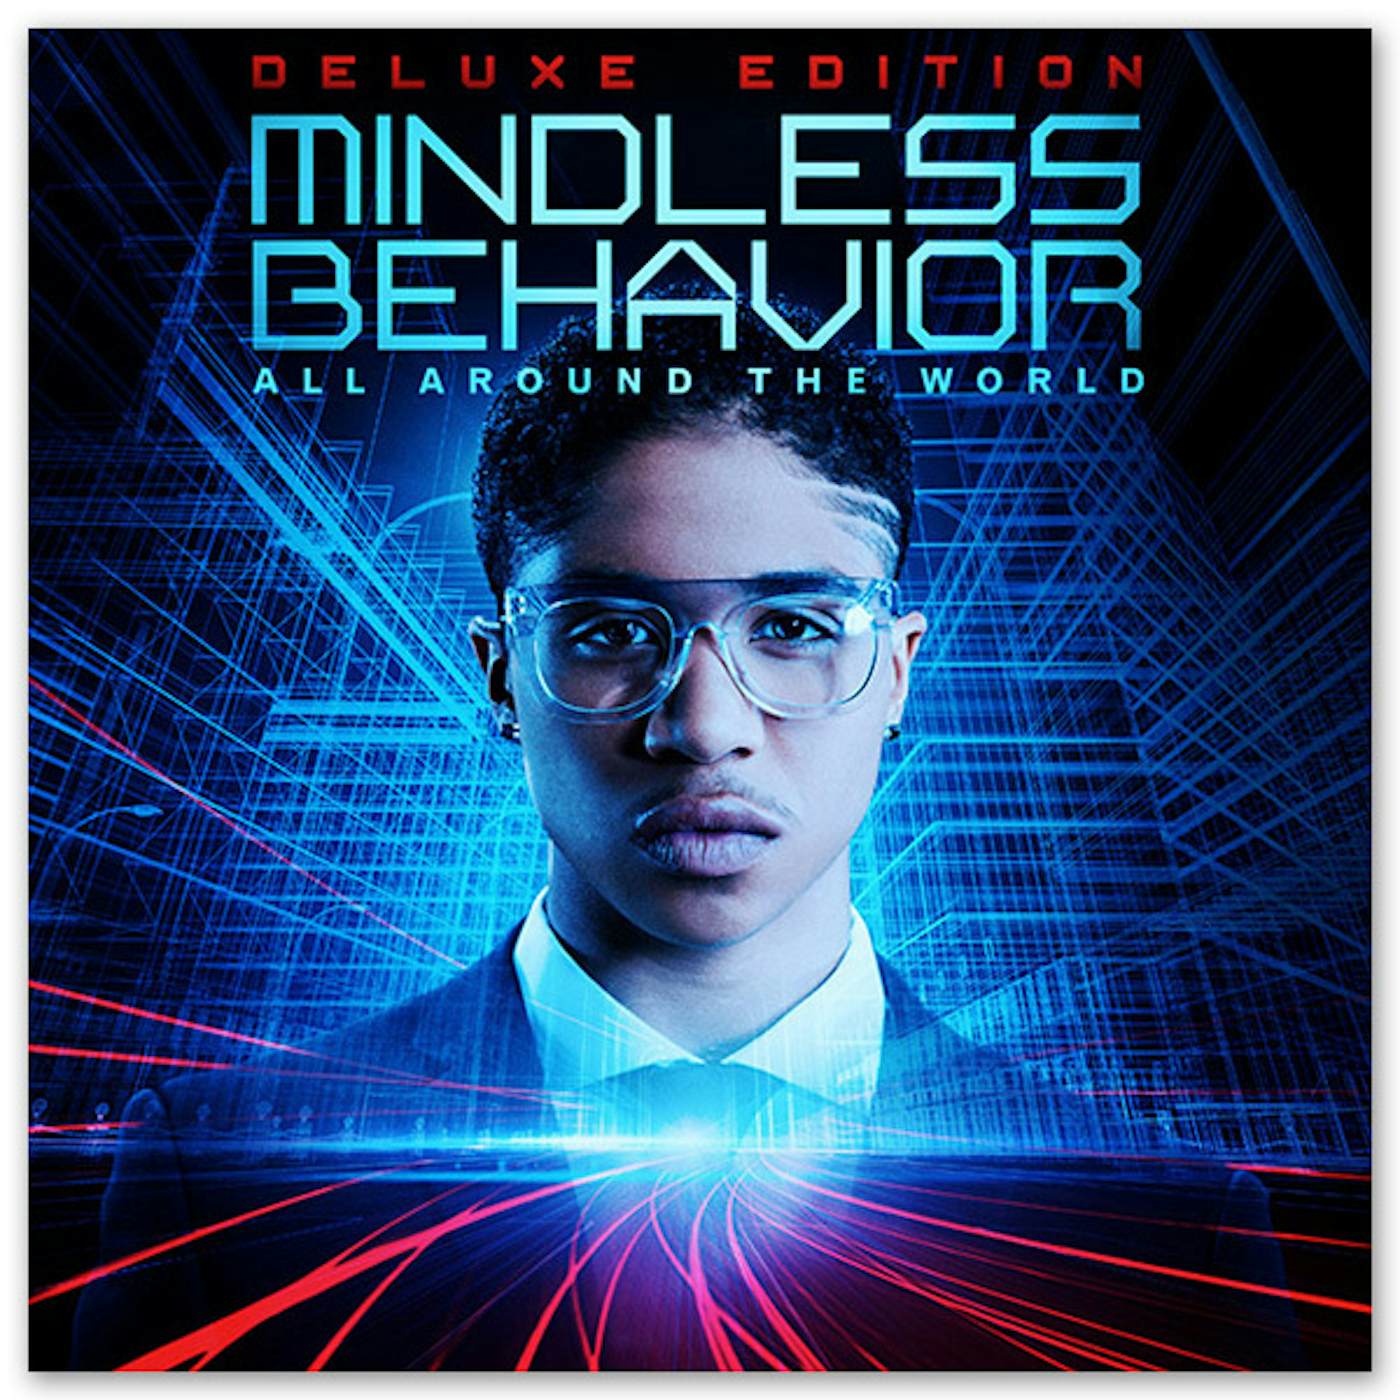 Mindless Behavior - Deluxe All Around The World CD - Roc Royal